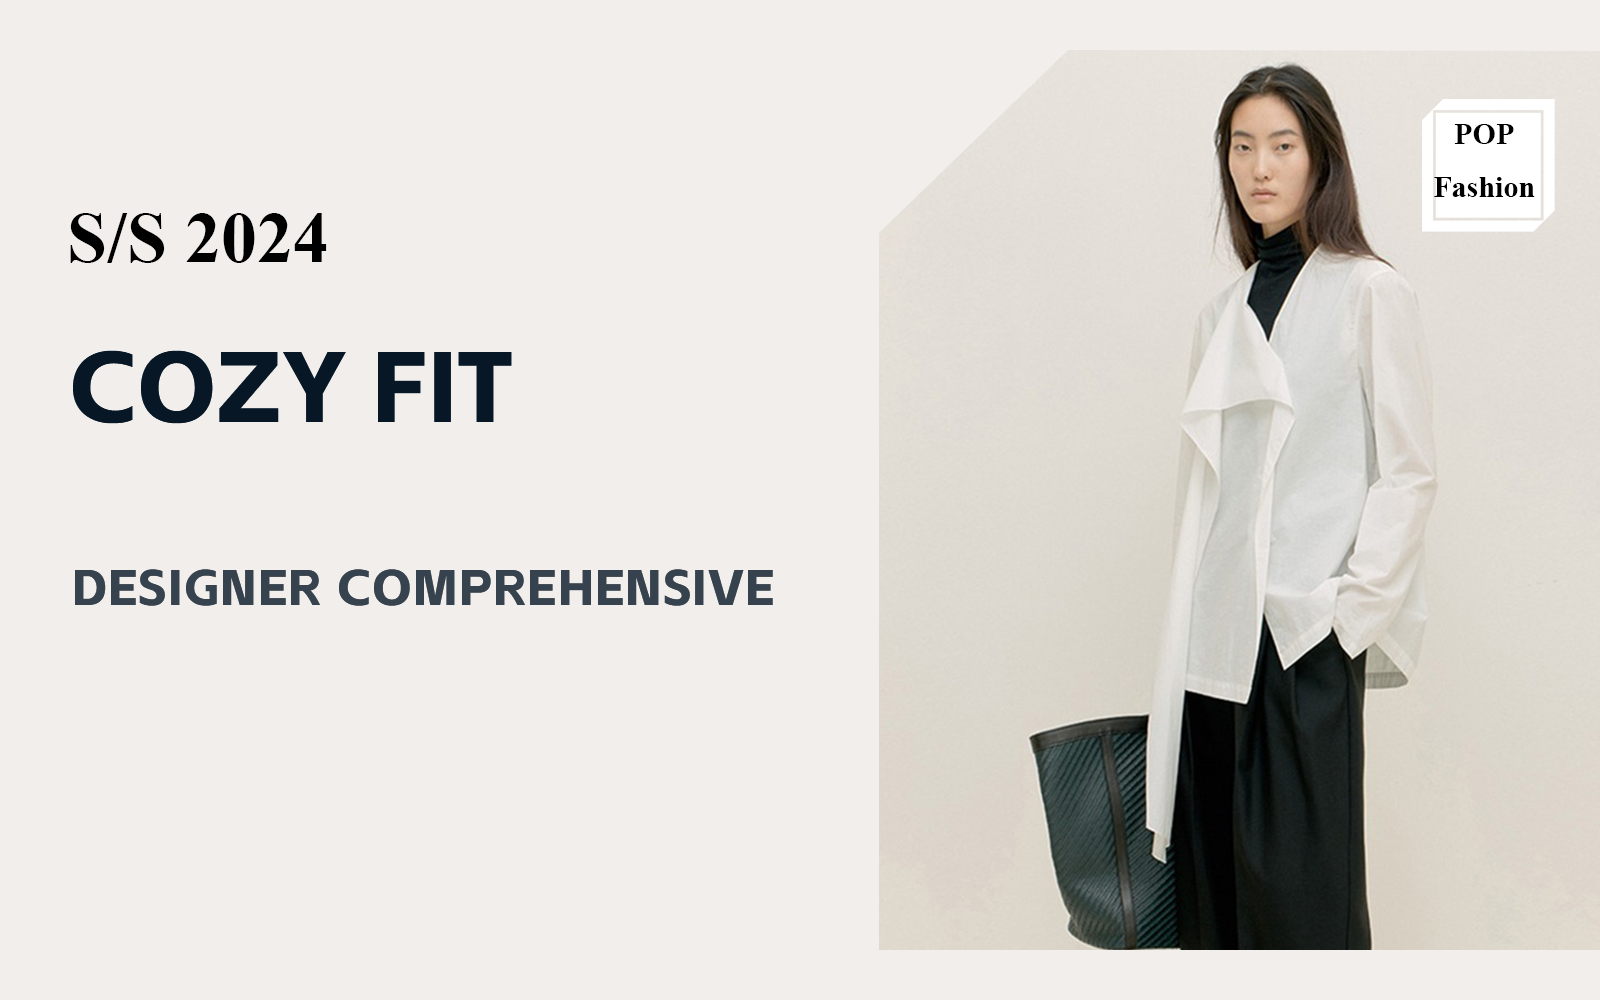 Cozy Fit -- The Comprehensive Analysis of Women's Fashion Designer Brands